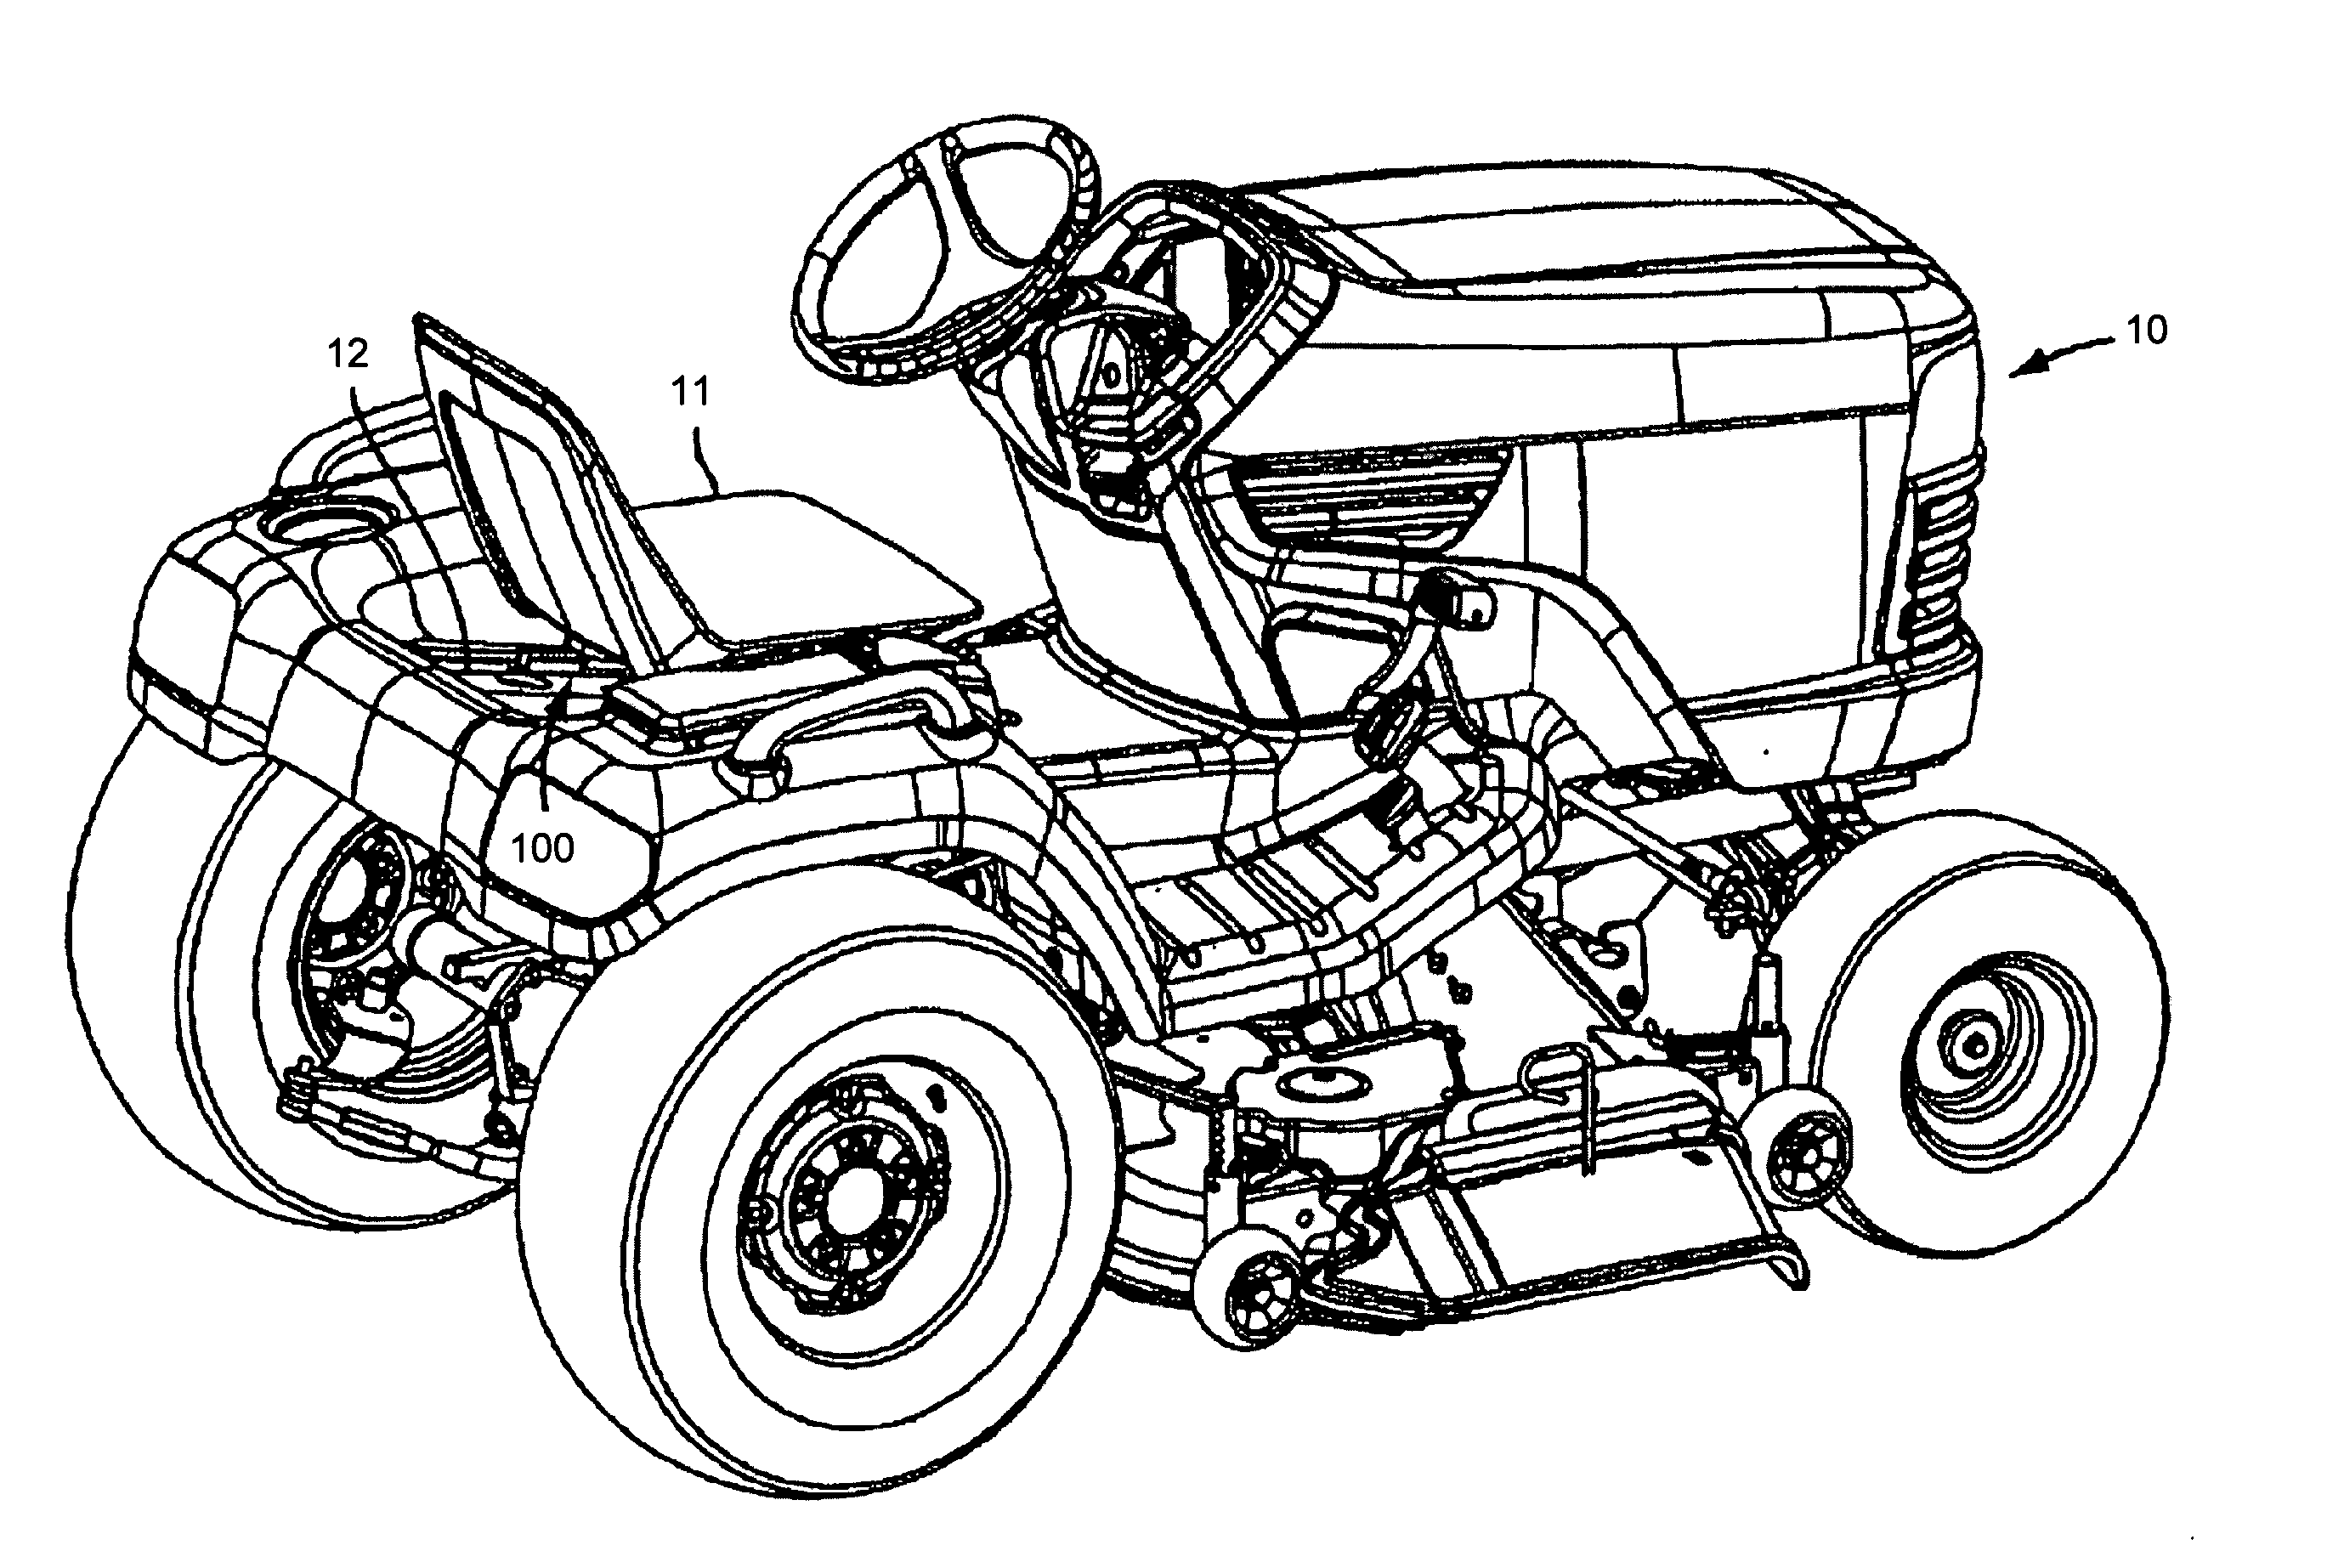 Adjustable suspension system for a seat